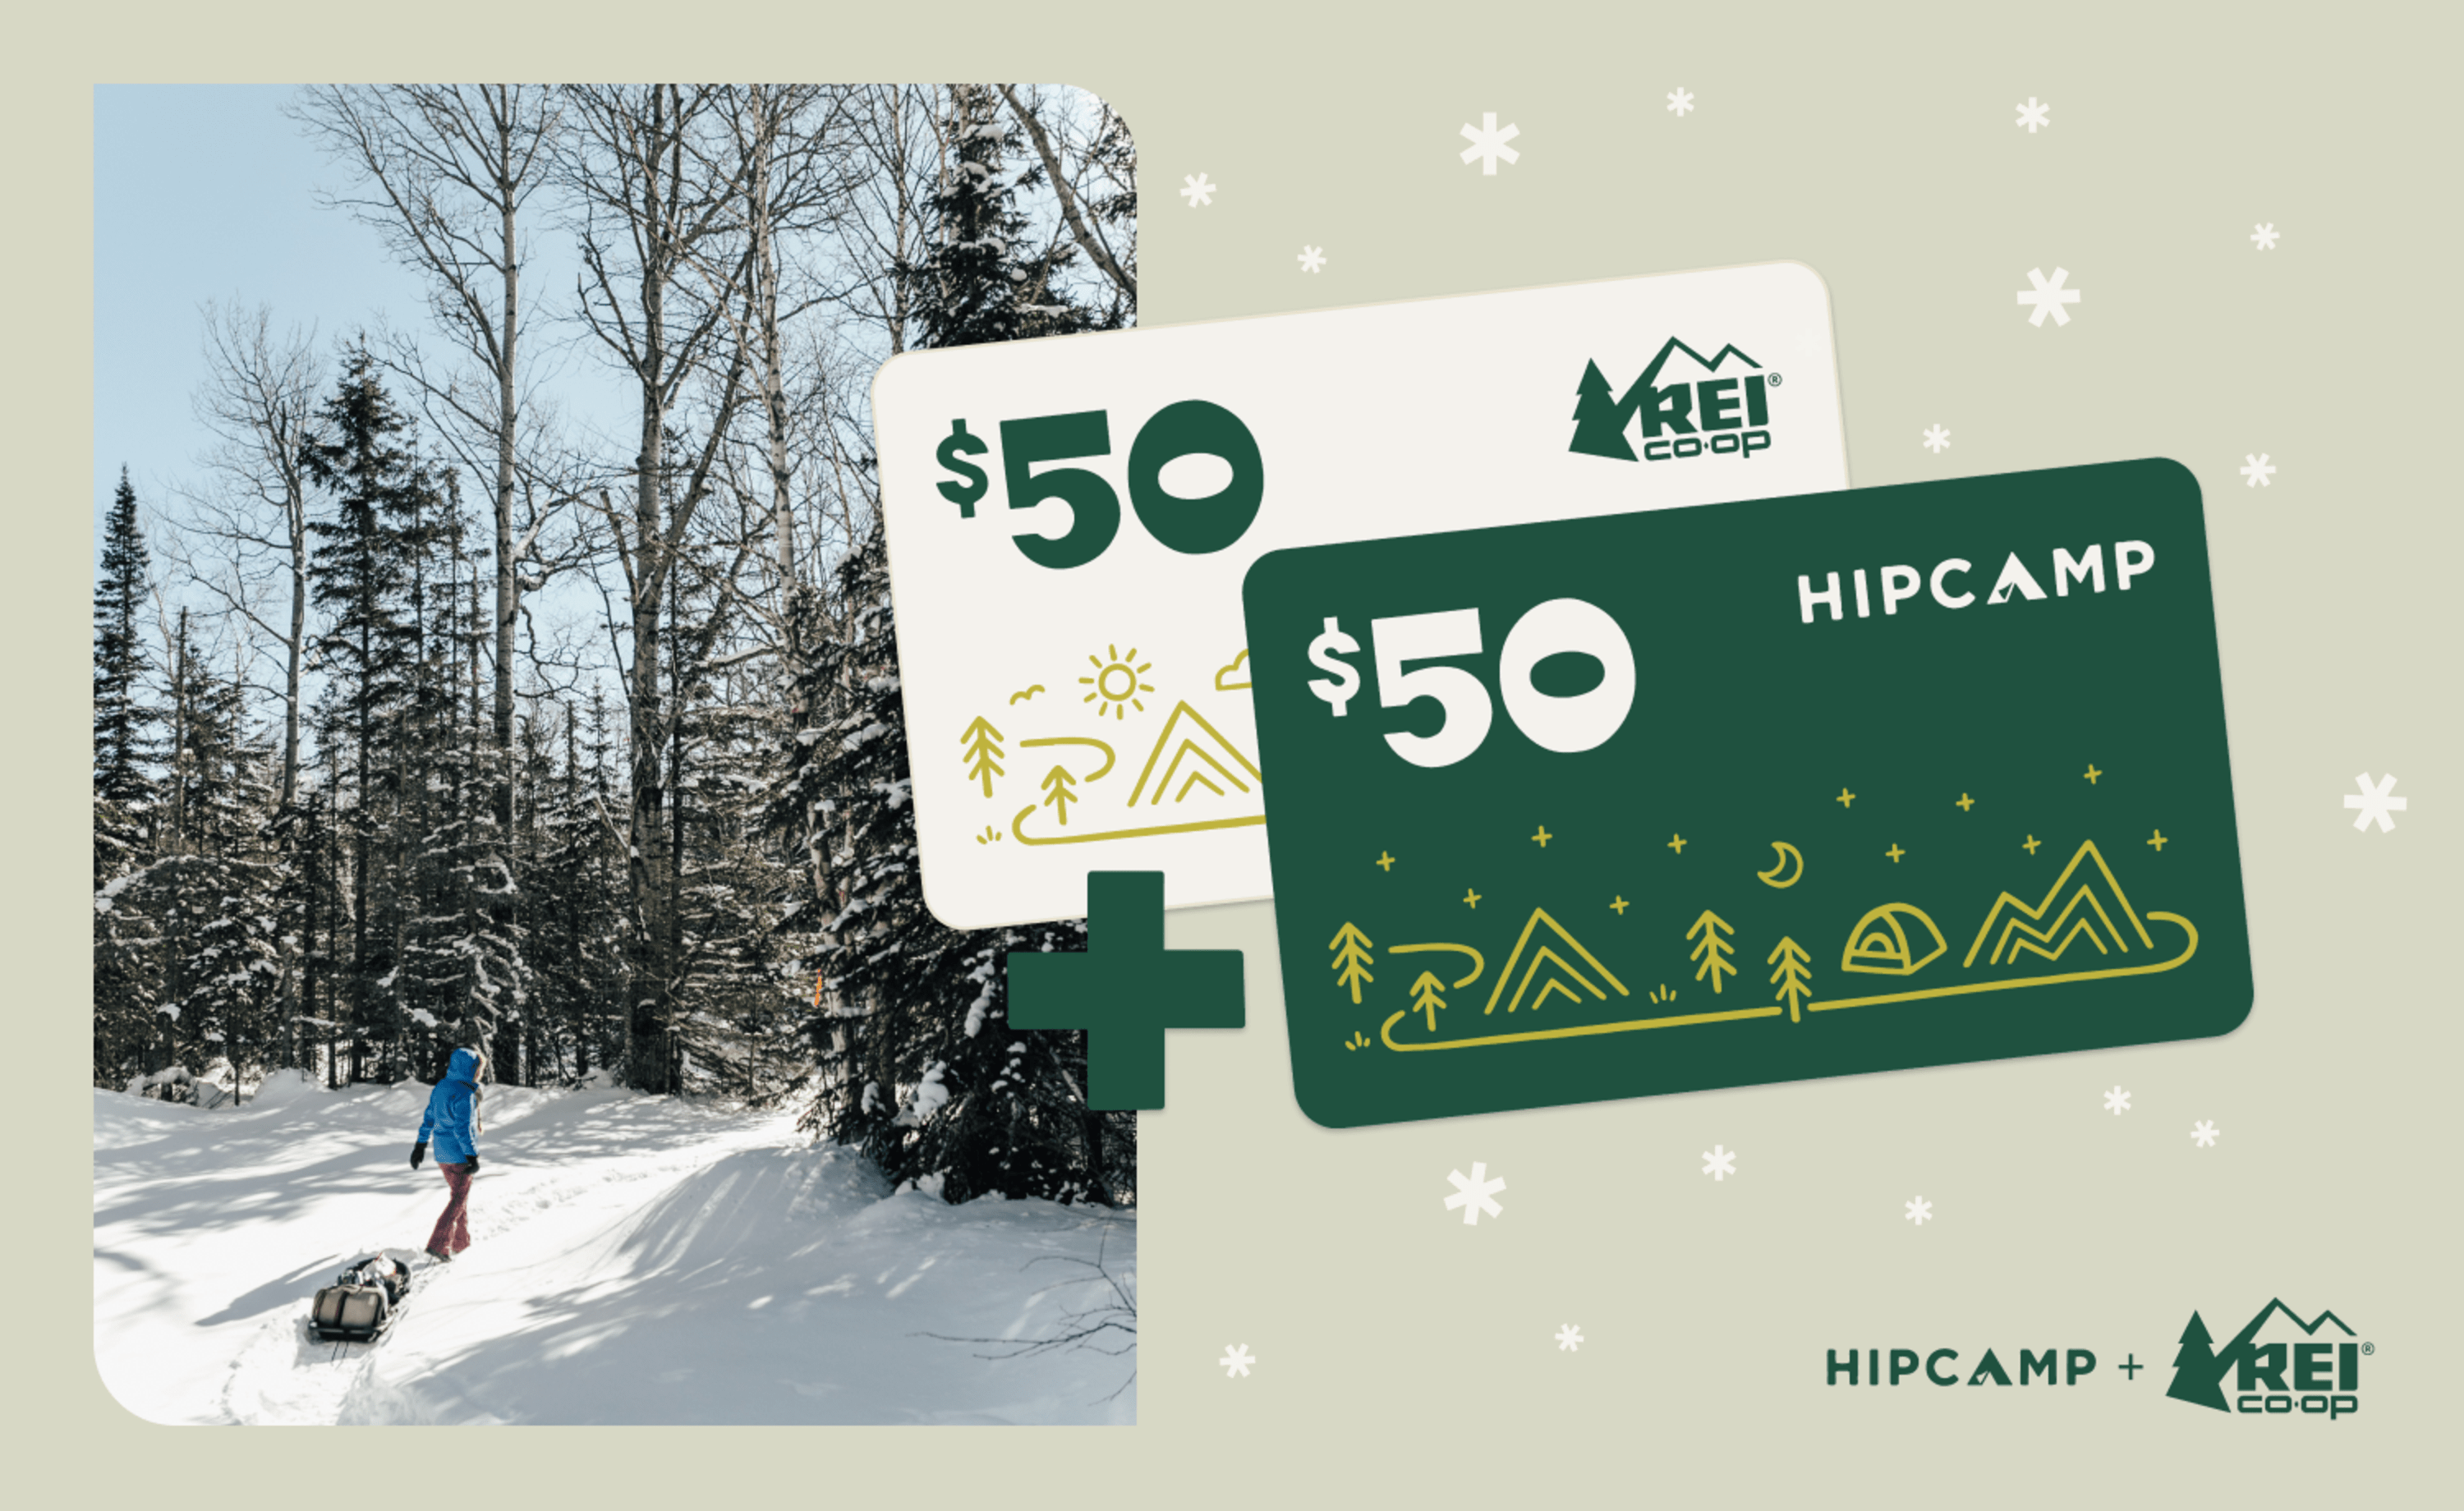 Introducing the Hipcamp + REI Gift Card Bundle